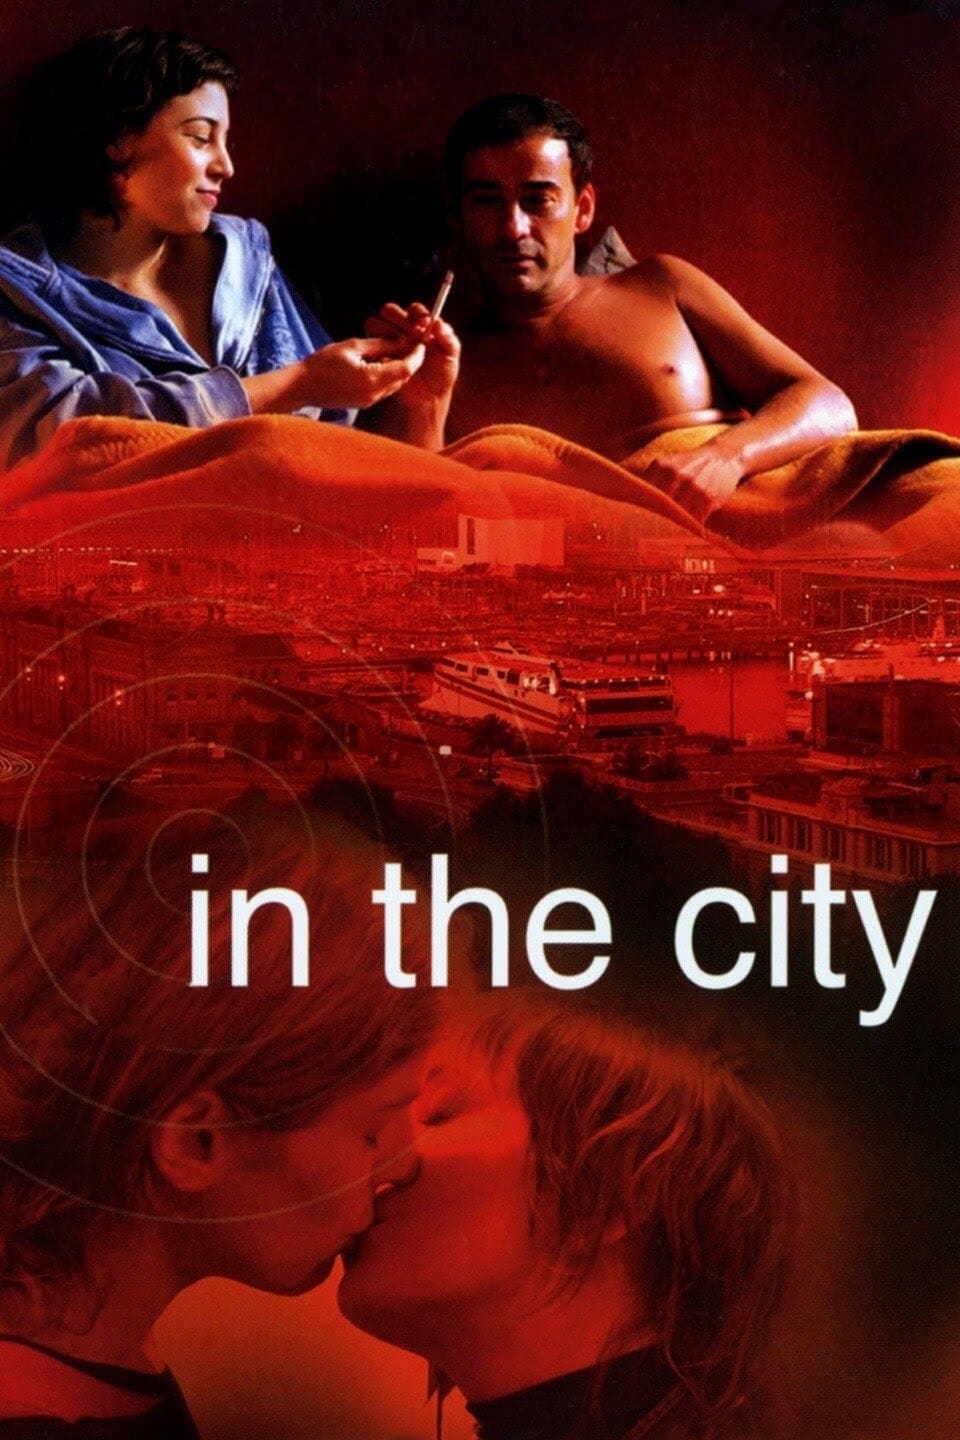 In the City (2003)